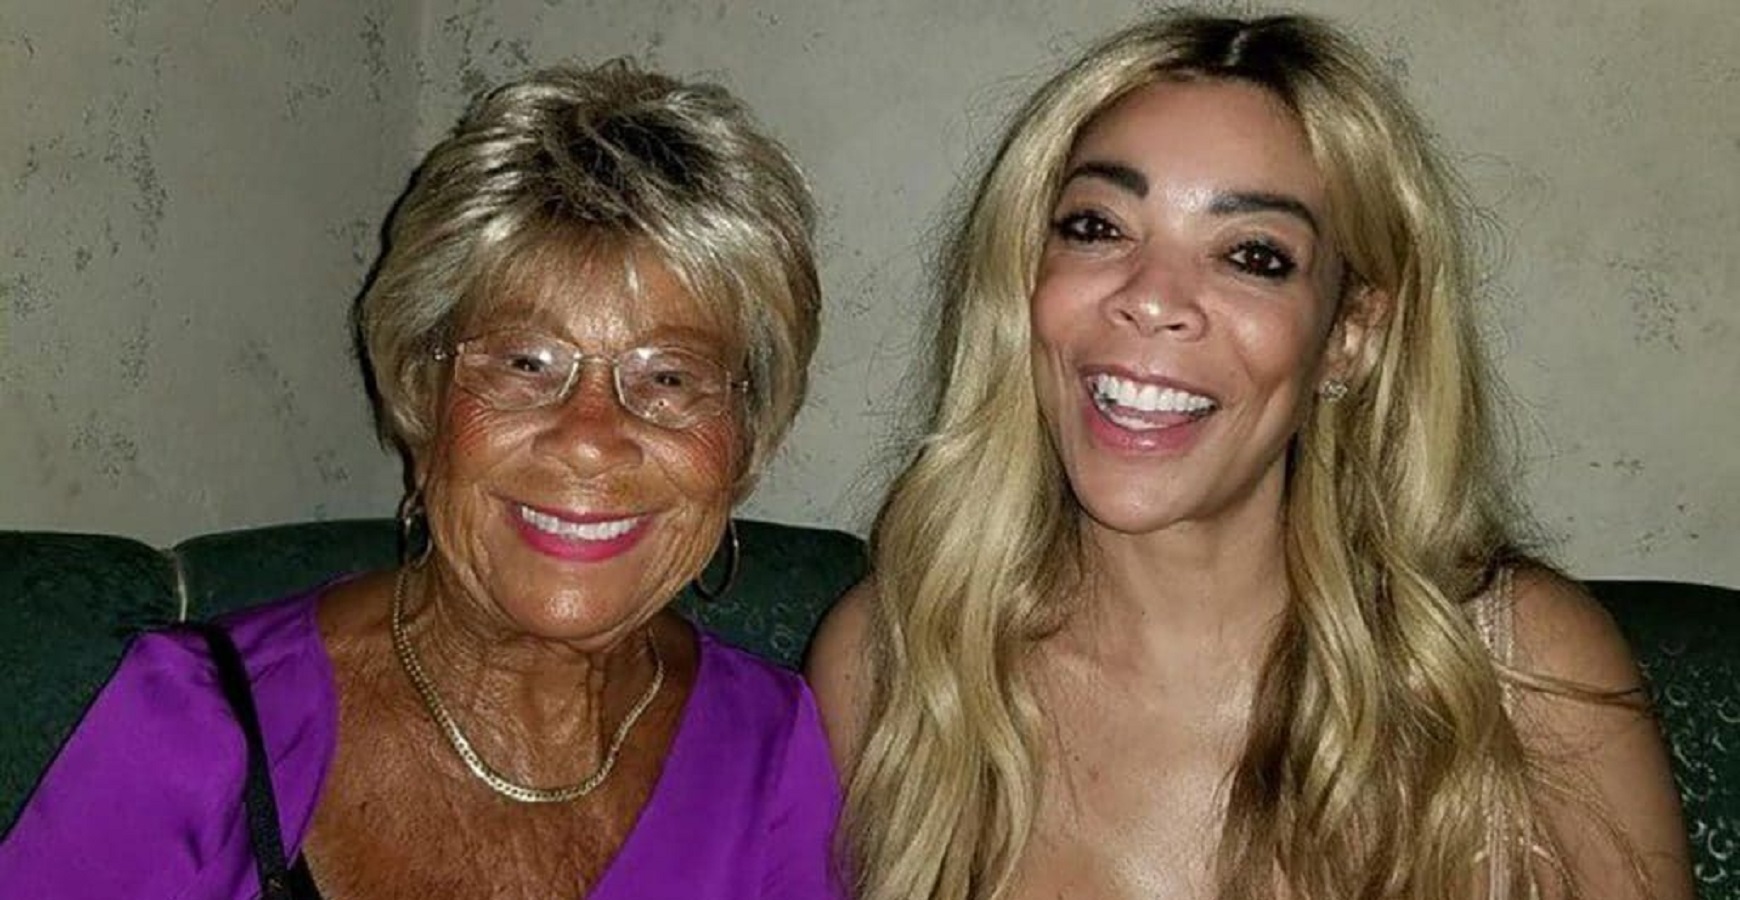 Wendy Williams Confirms Her Mother Passed Several Weeks Ago, But Her Brother Says It Happened ‘Last Sunday’